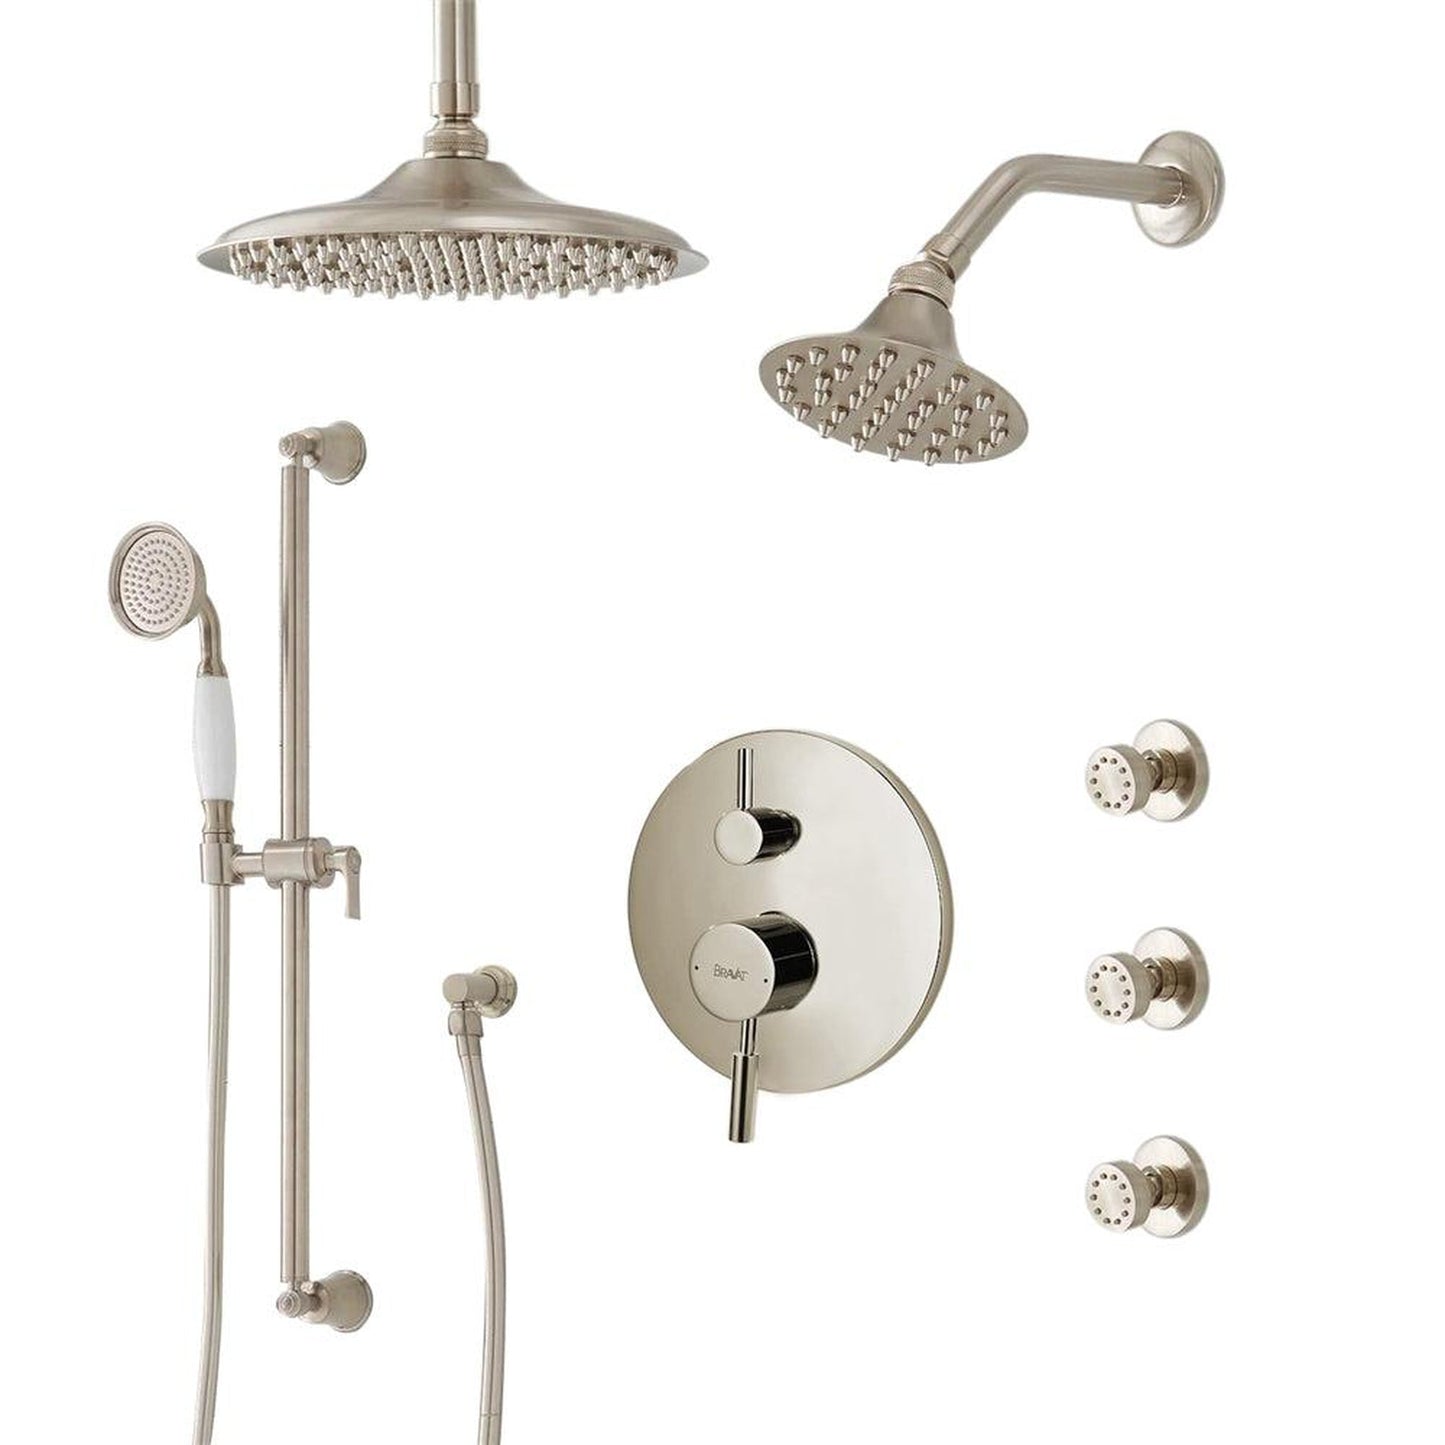 FontanaShowers Deluxe Designers 8" Brushed Nickel Round Dual Shower Head Rainfall Shower System With 3-Jet Body Sprays and Hand Shower